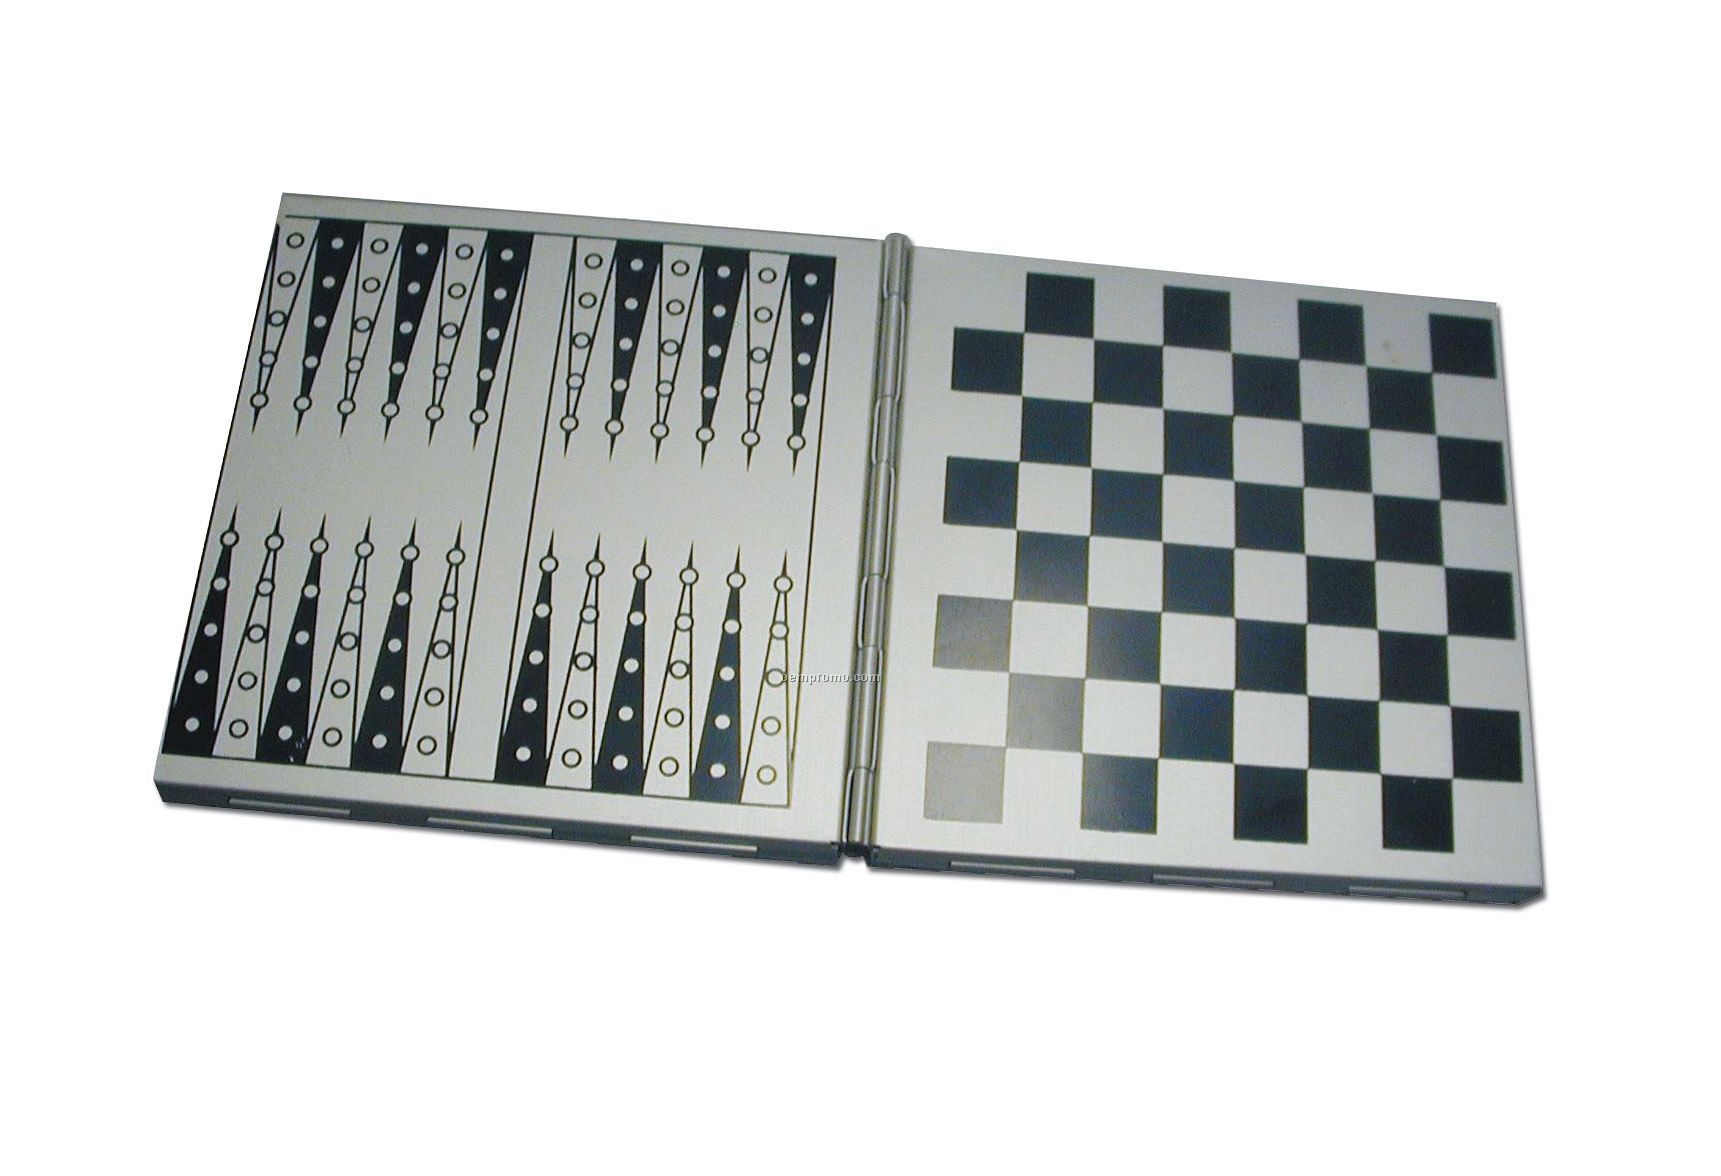 Magnetic 3-in-1 Metal Case Chess/ Checkers/ Backgammon Set